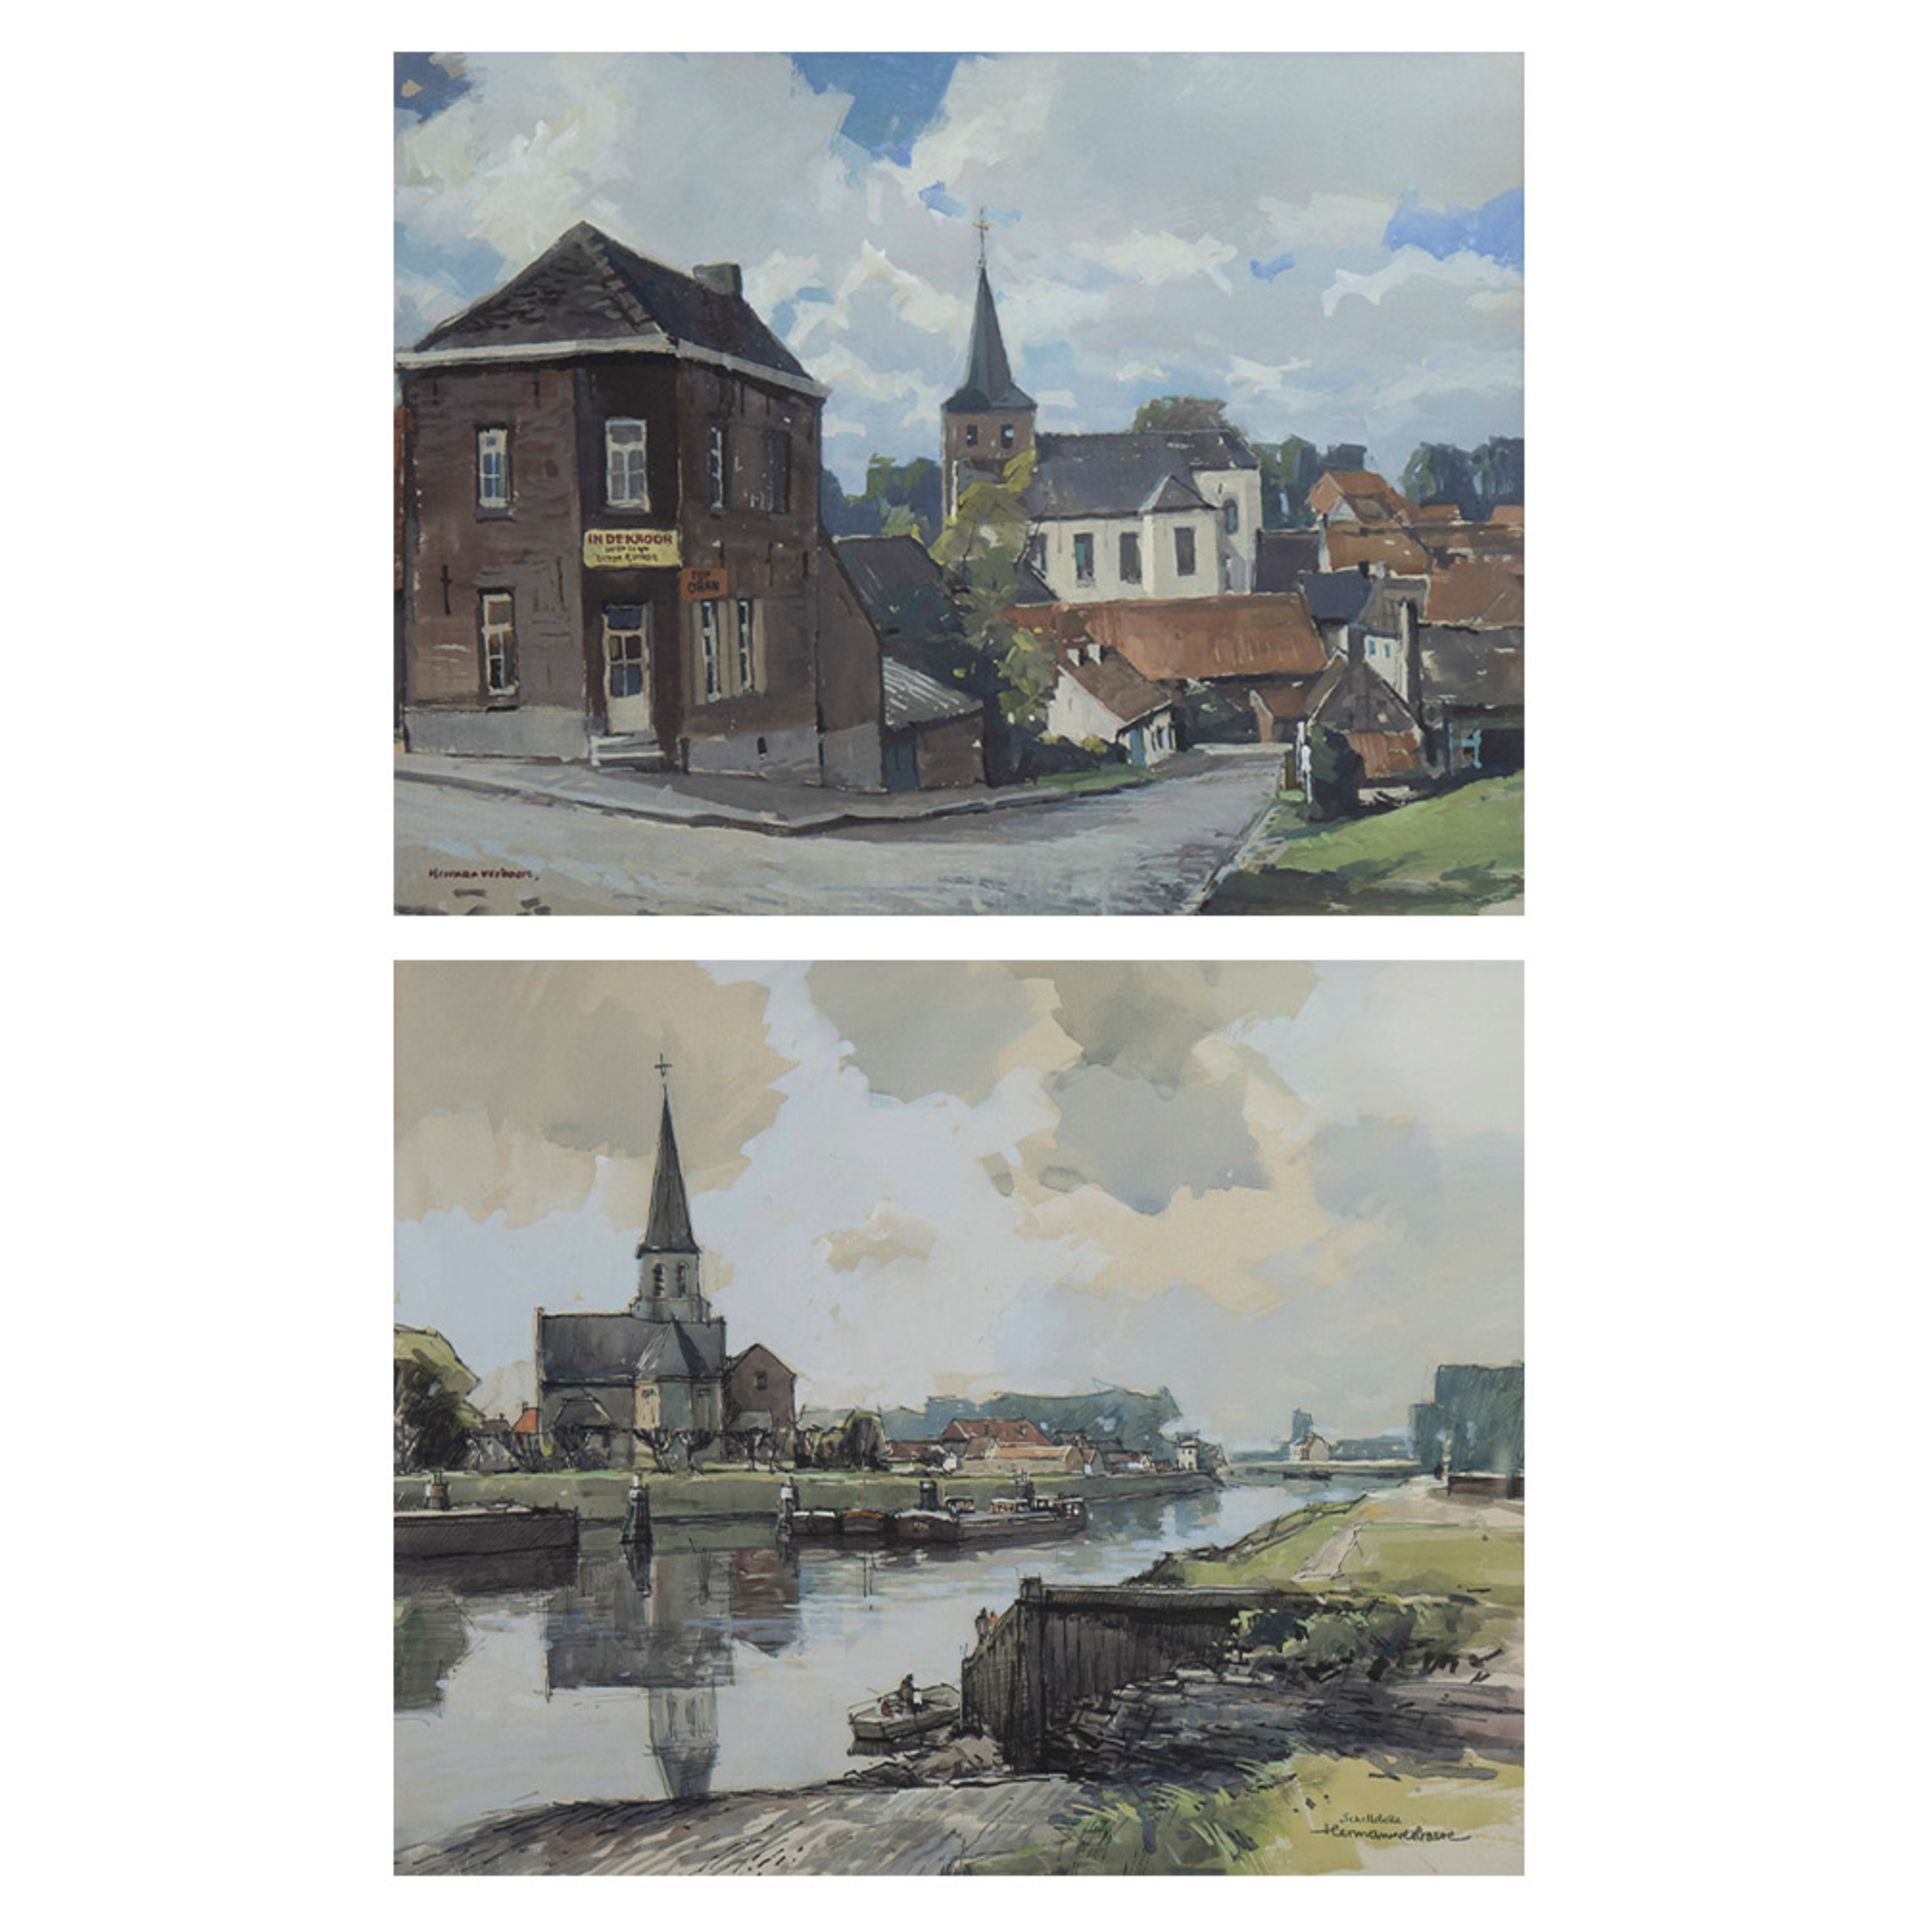 Herman VERBAERE (1906-1993), 2 watercolour paintings of the View of Zegelem and Ferry Schellebelle,